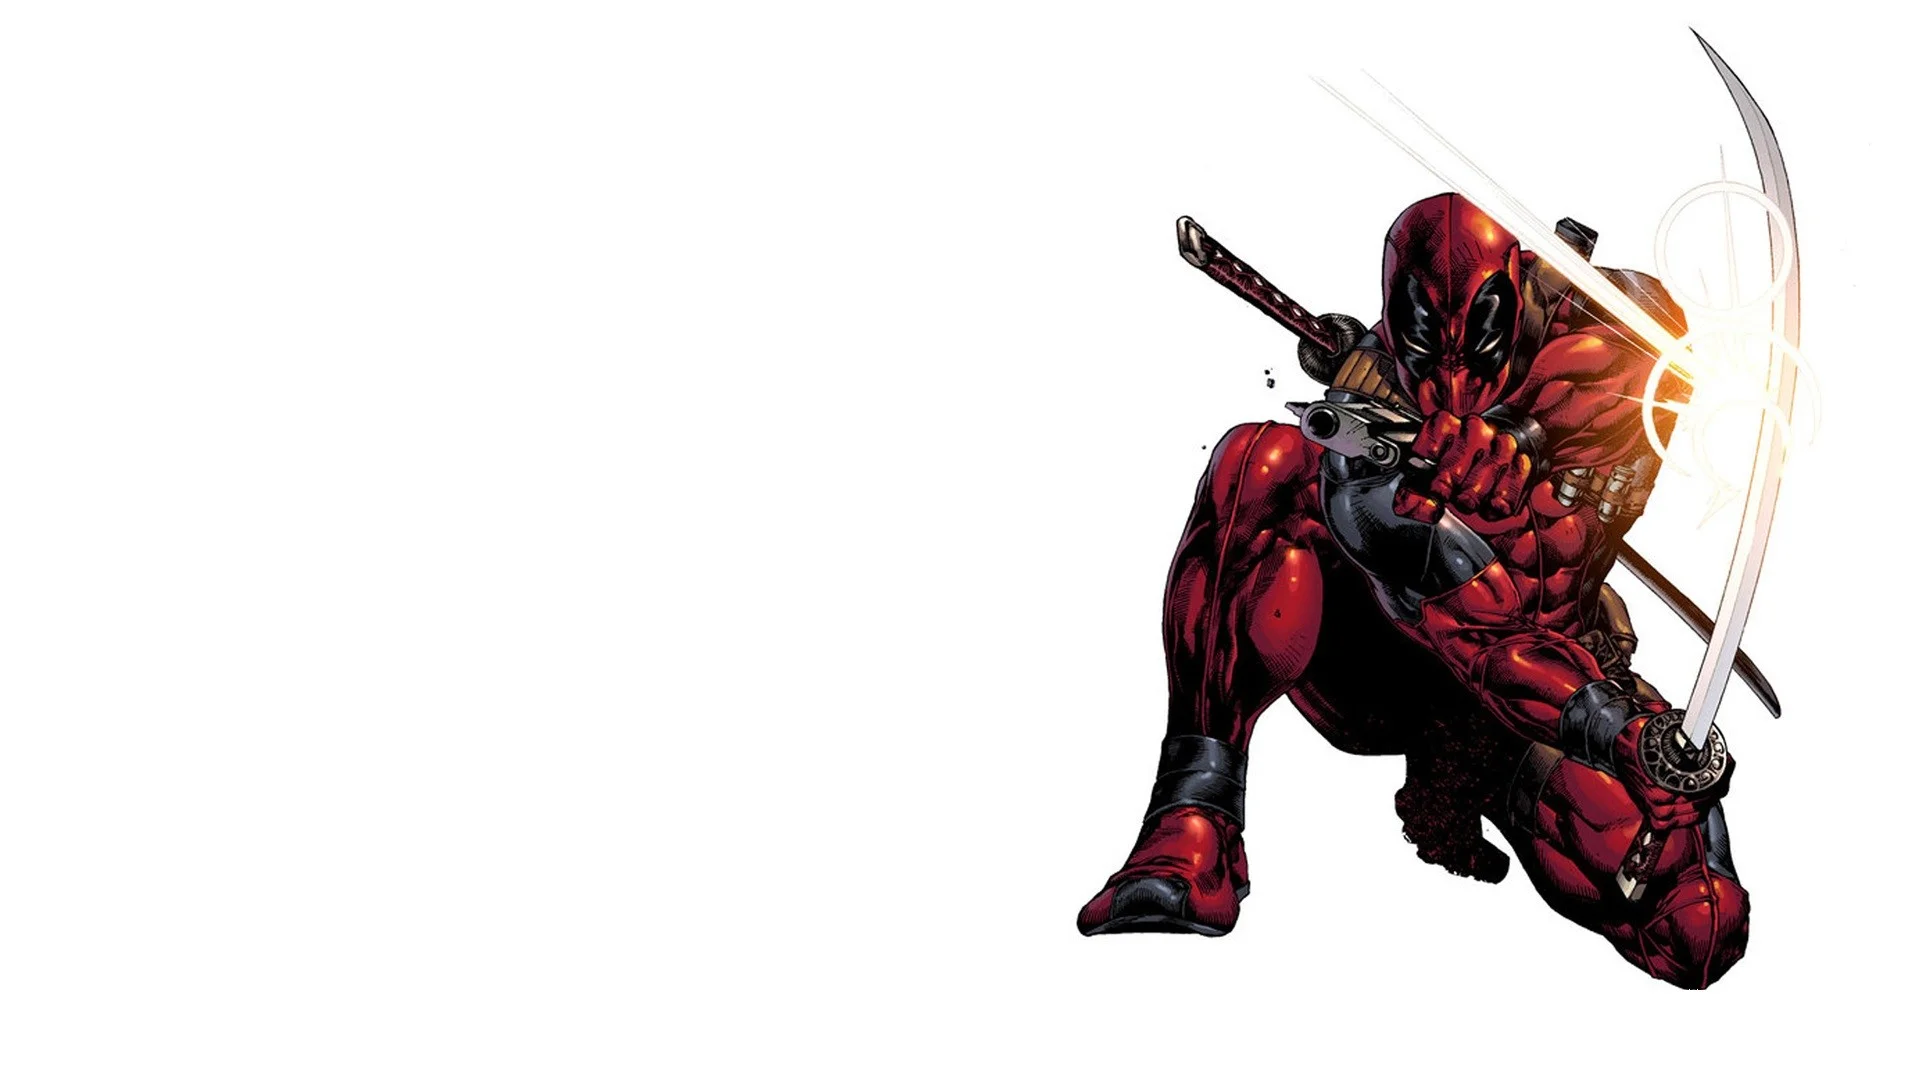 my collection of deadpool wallpapers.